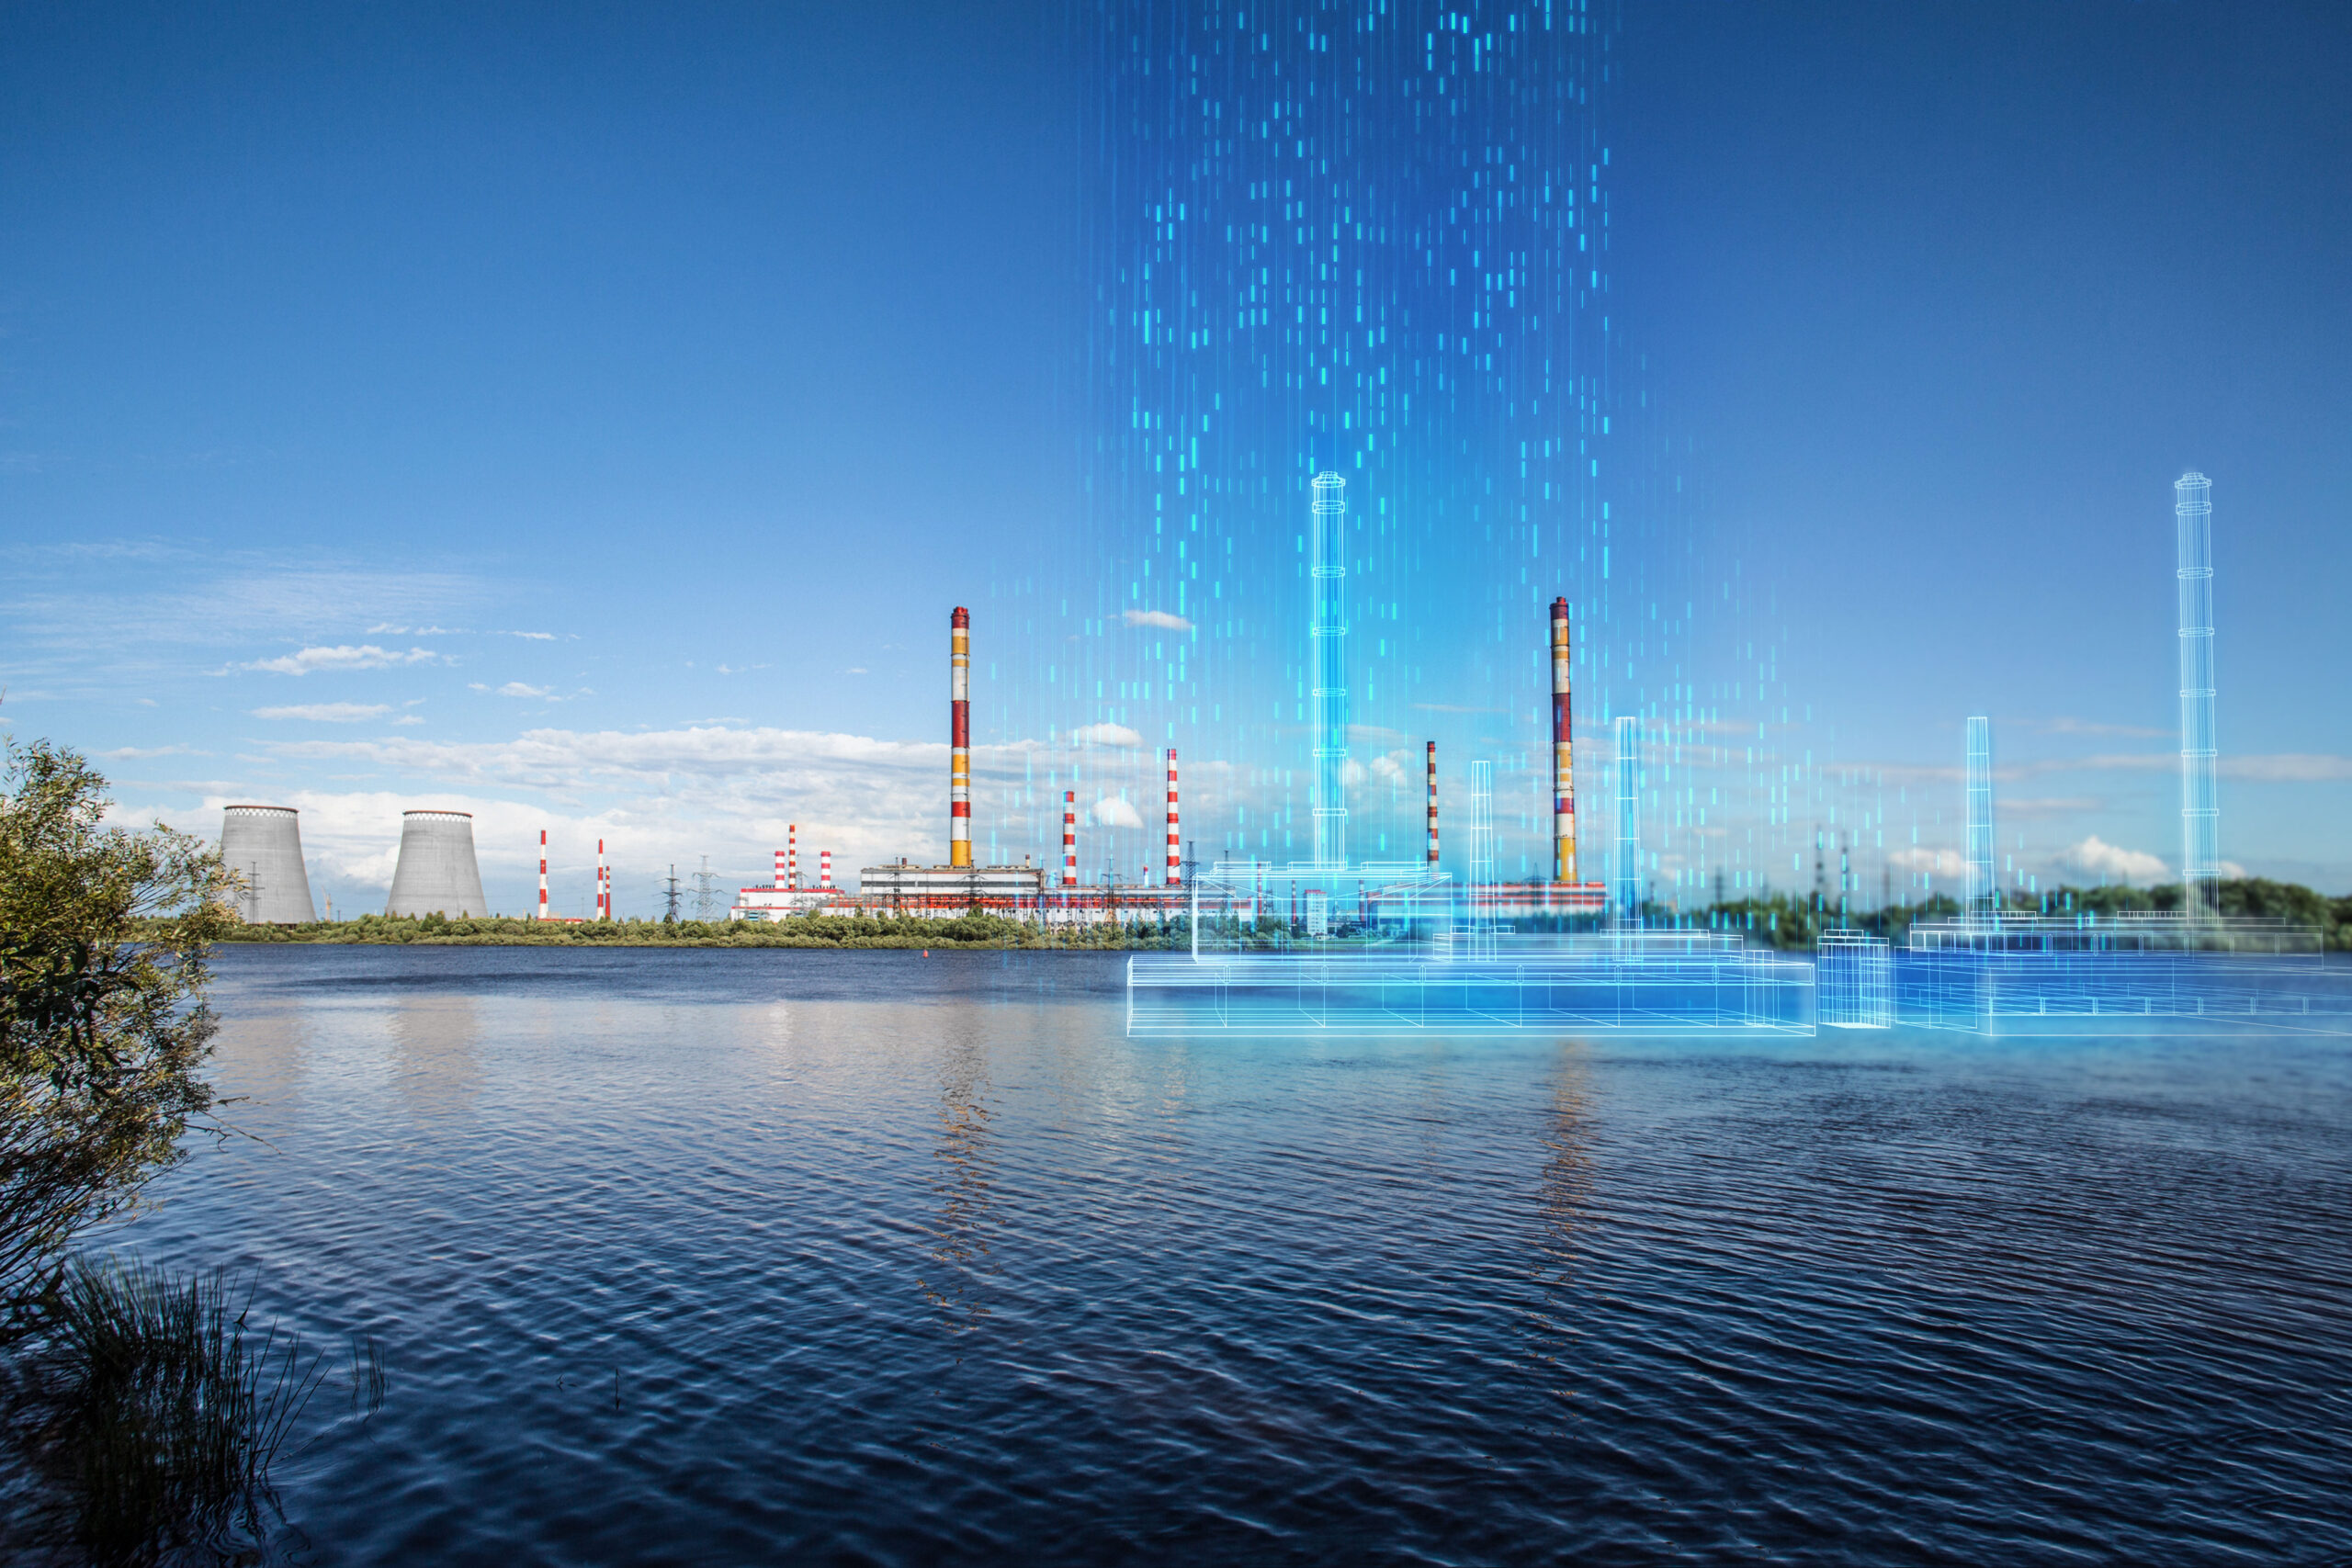 Nuclear power plant across water with digital overlay and blue sky.